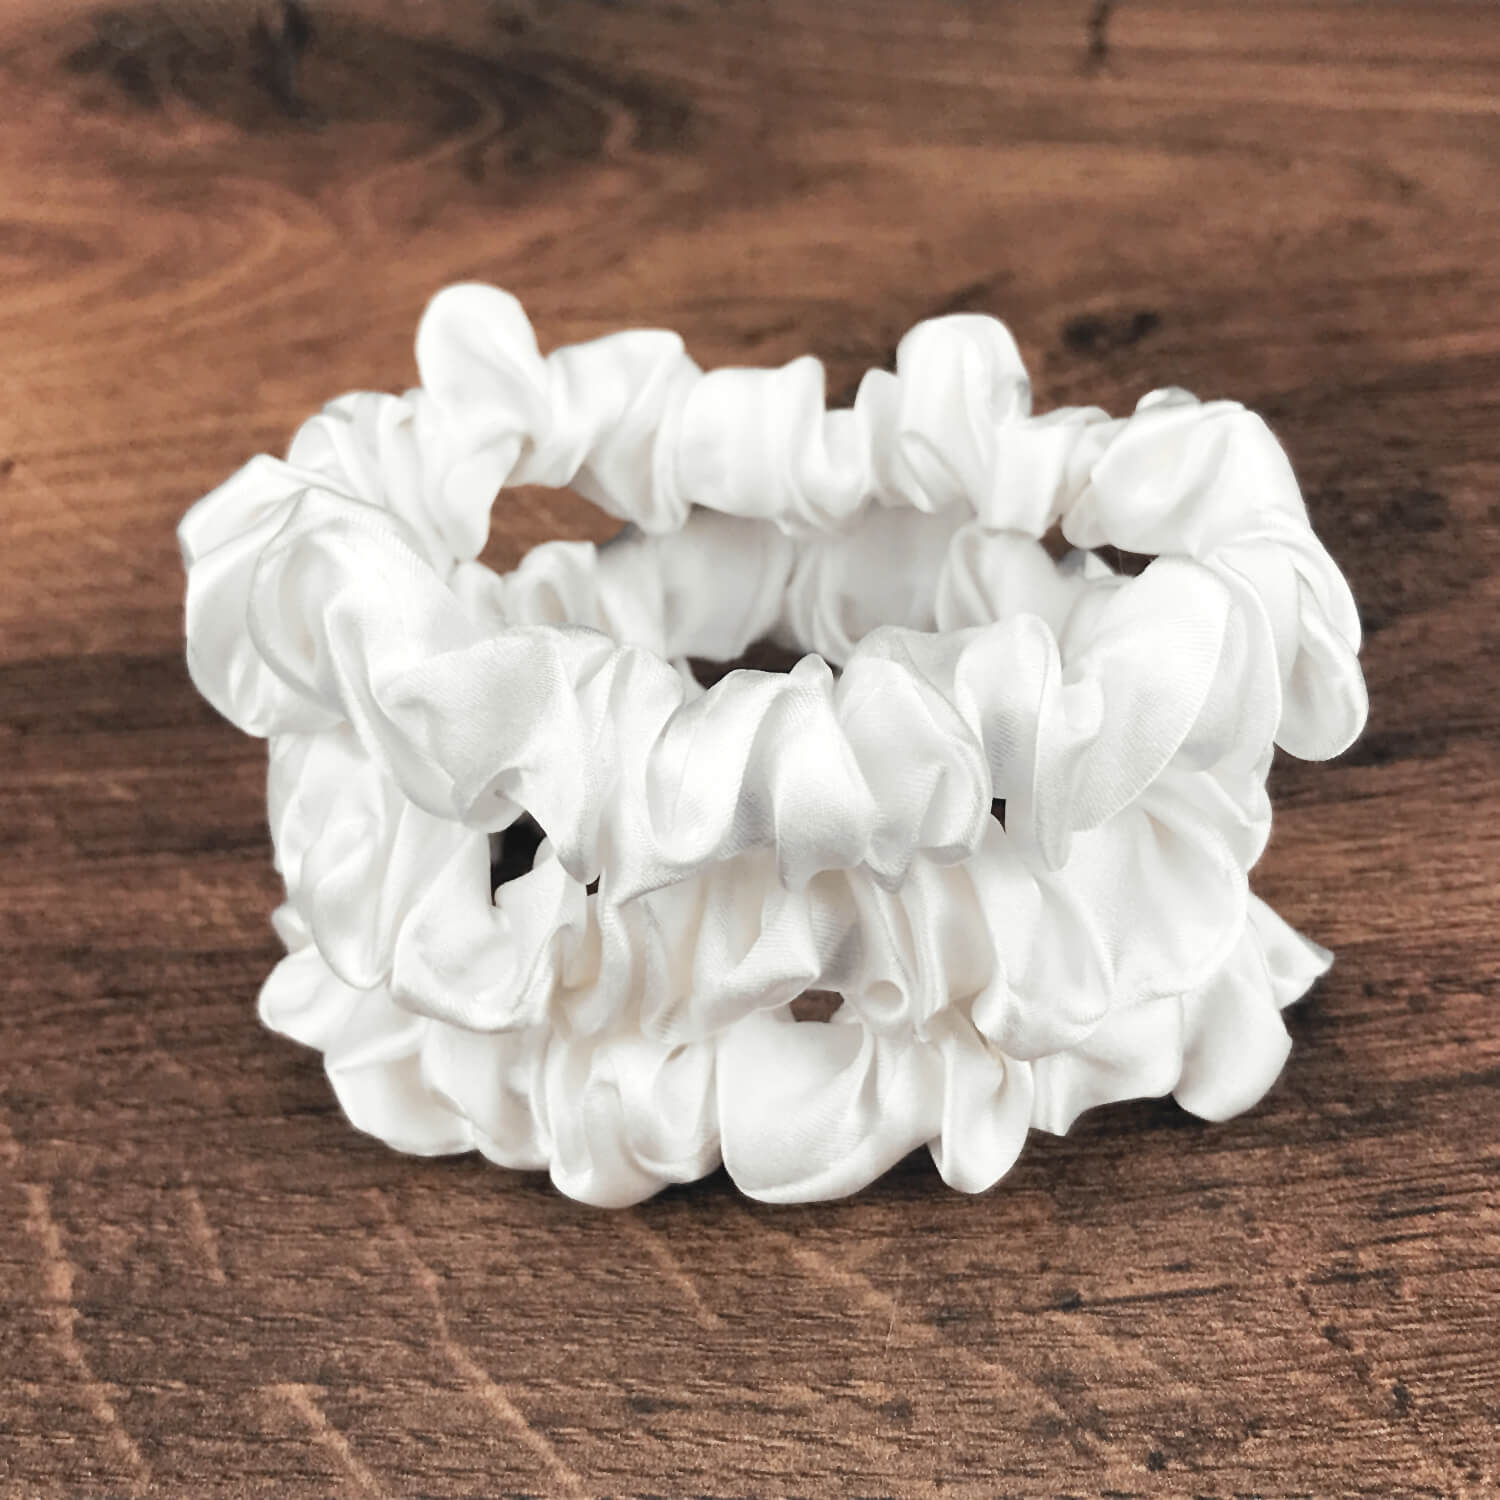 thin ivory silk hair ties by Celestial Silk stacked in a pile on a wood vanity